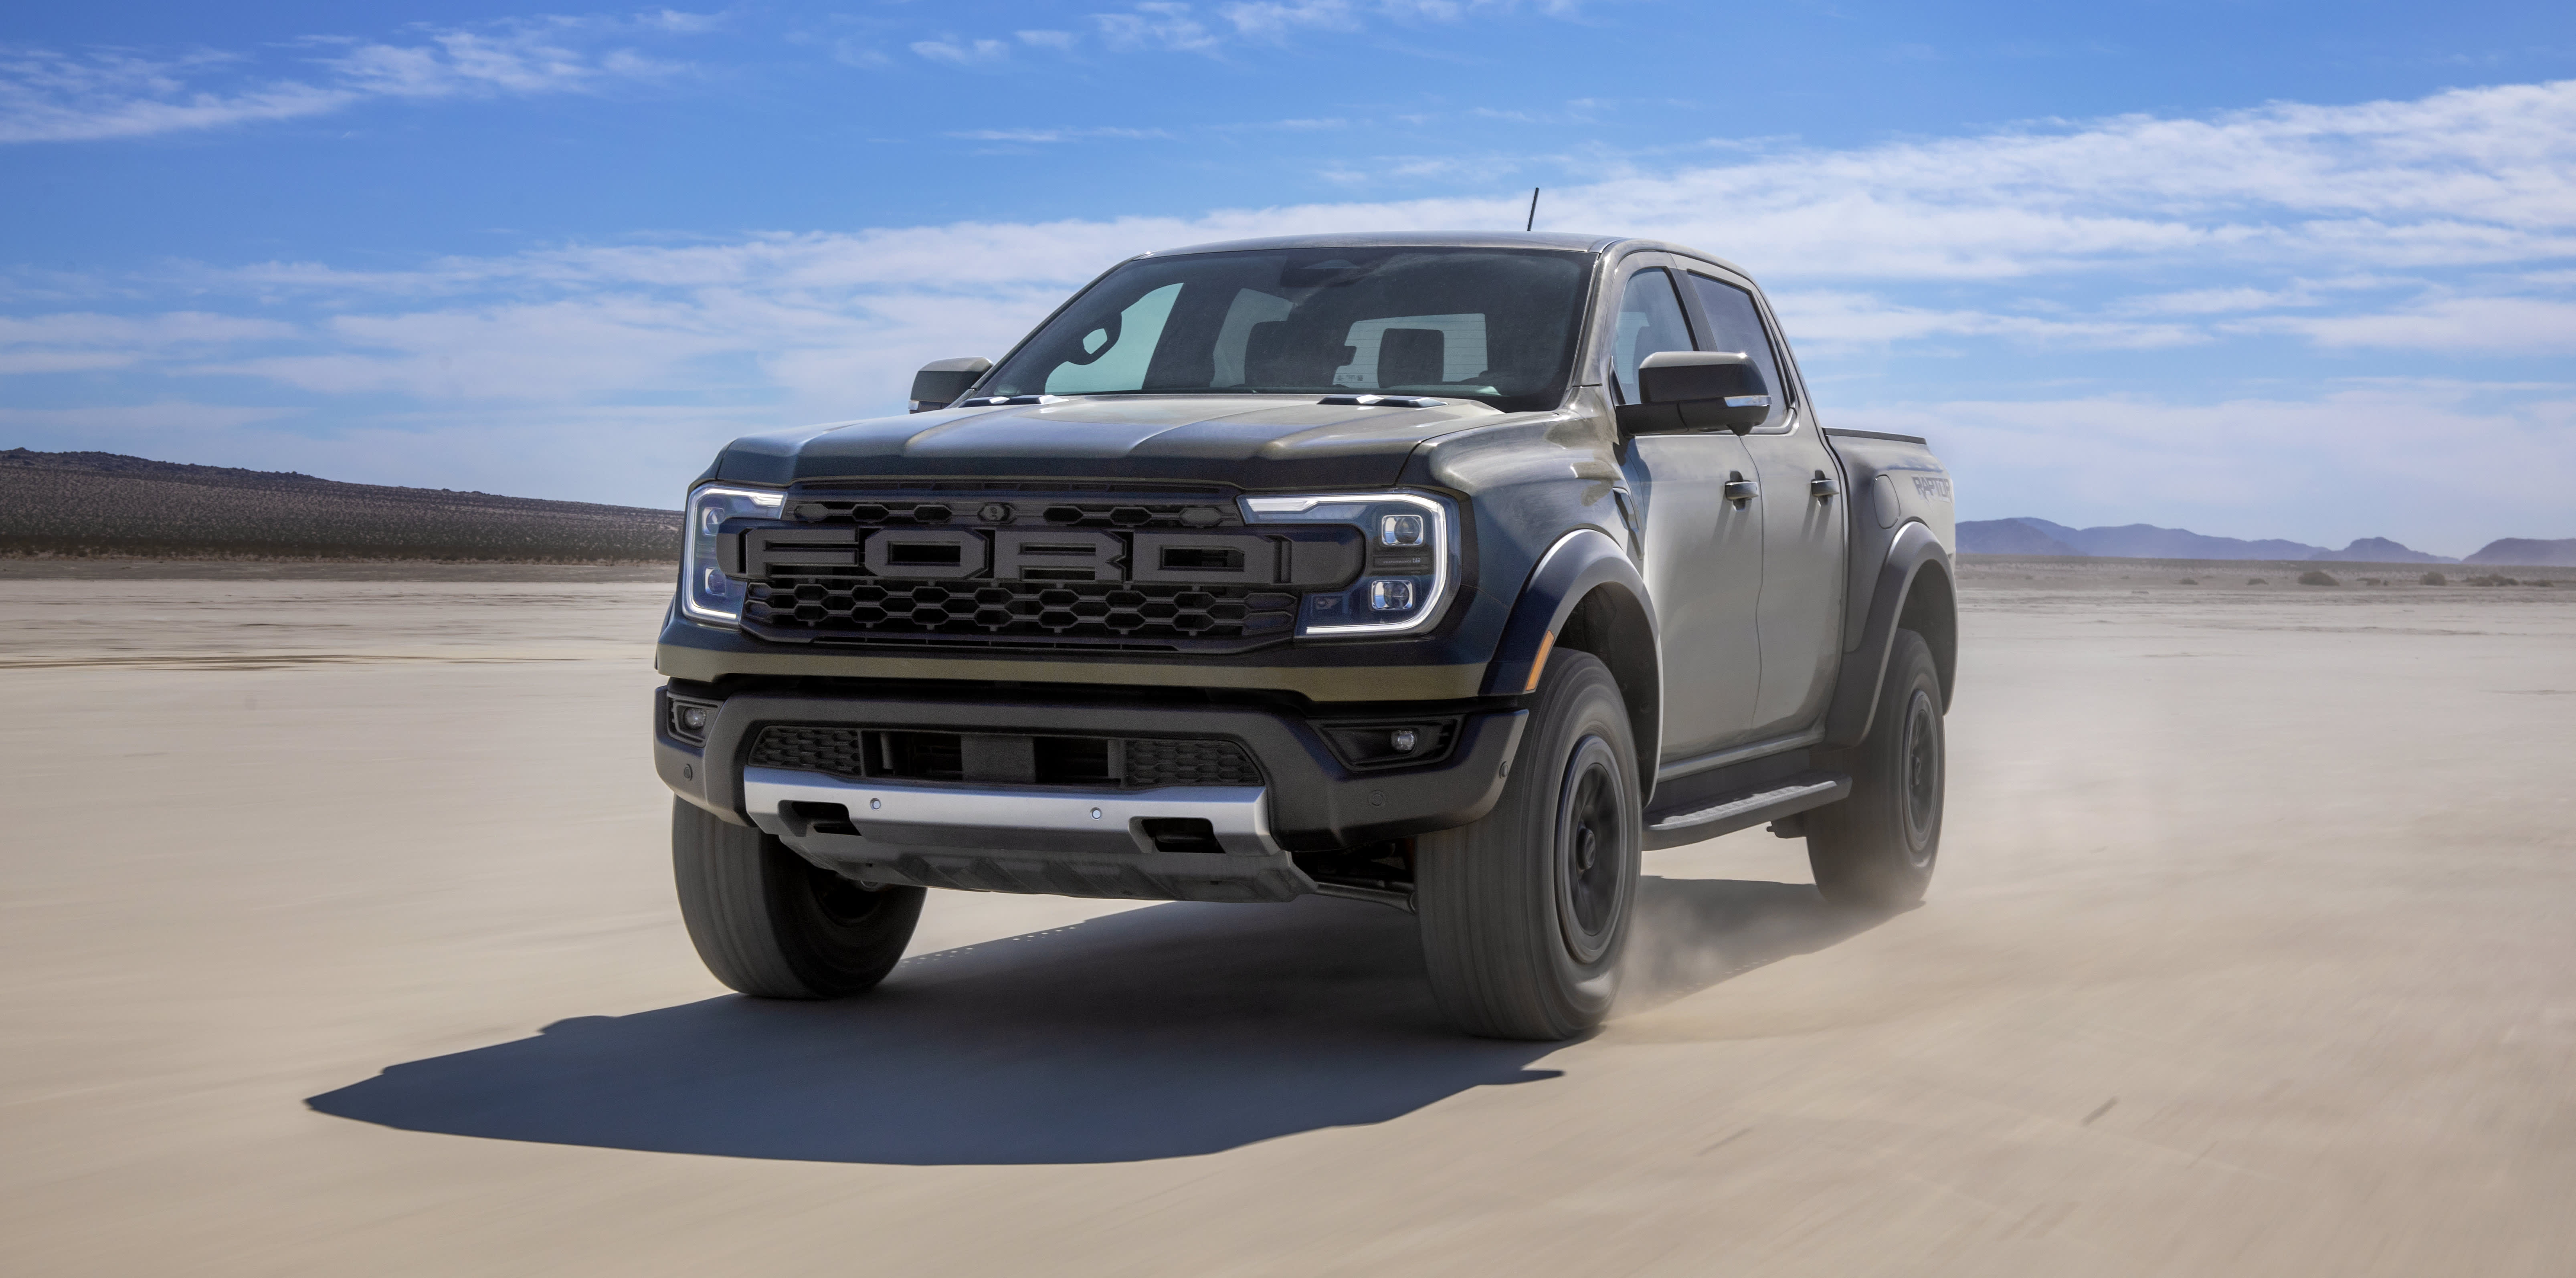 Ford unveils redesigned Ranger truck with new Raptor performance model